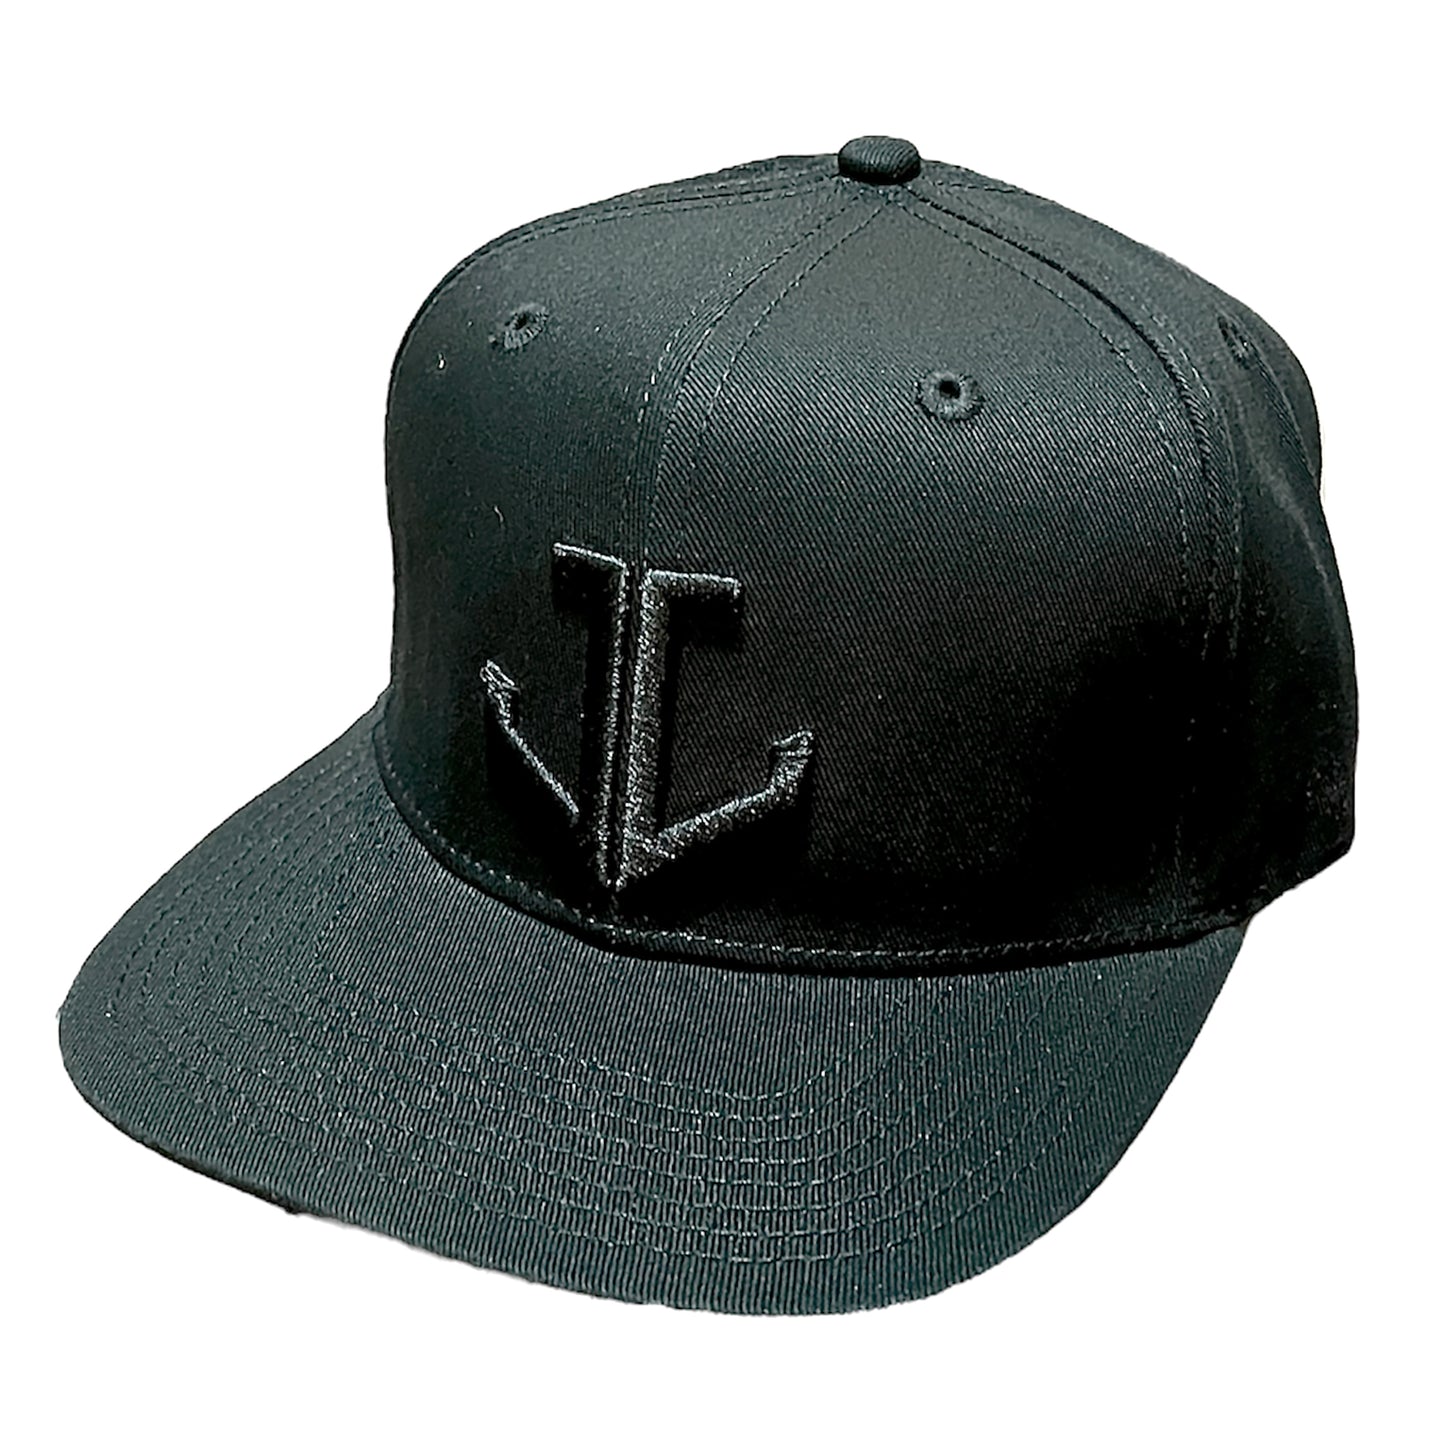 JL - BLACKED OUT Hat